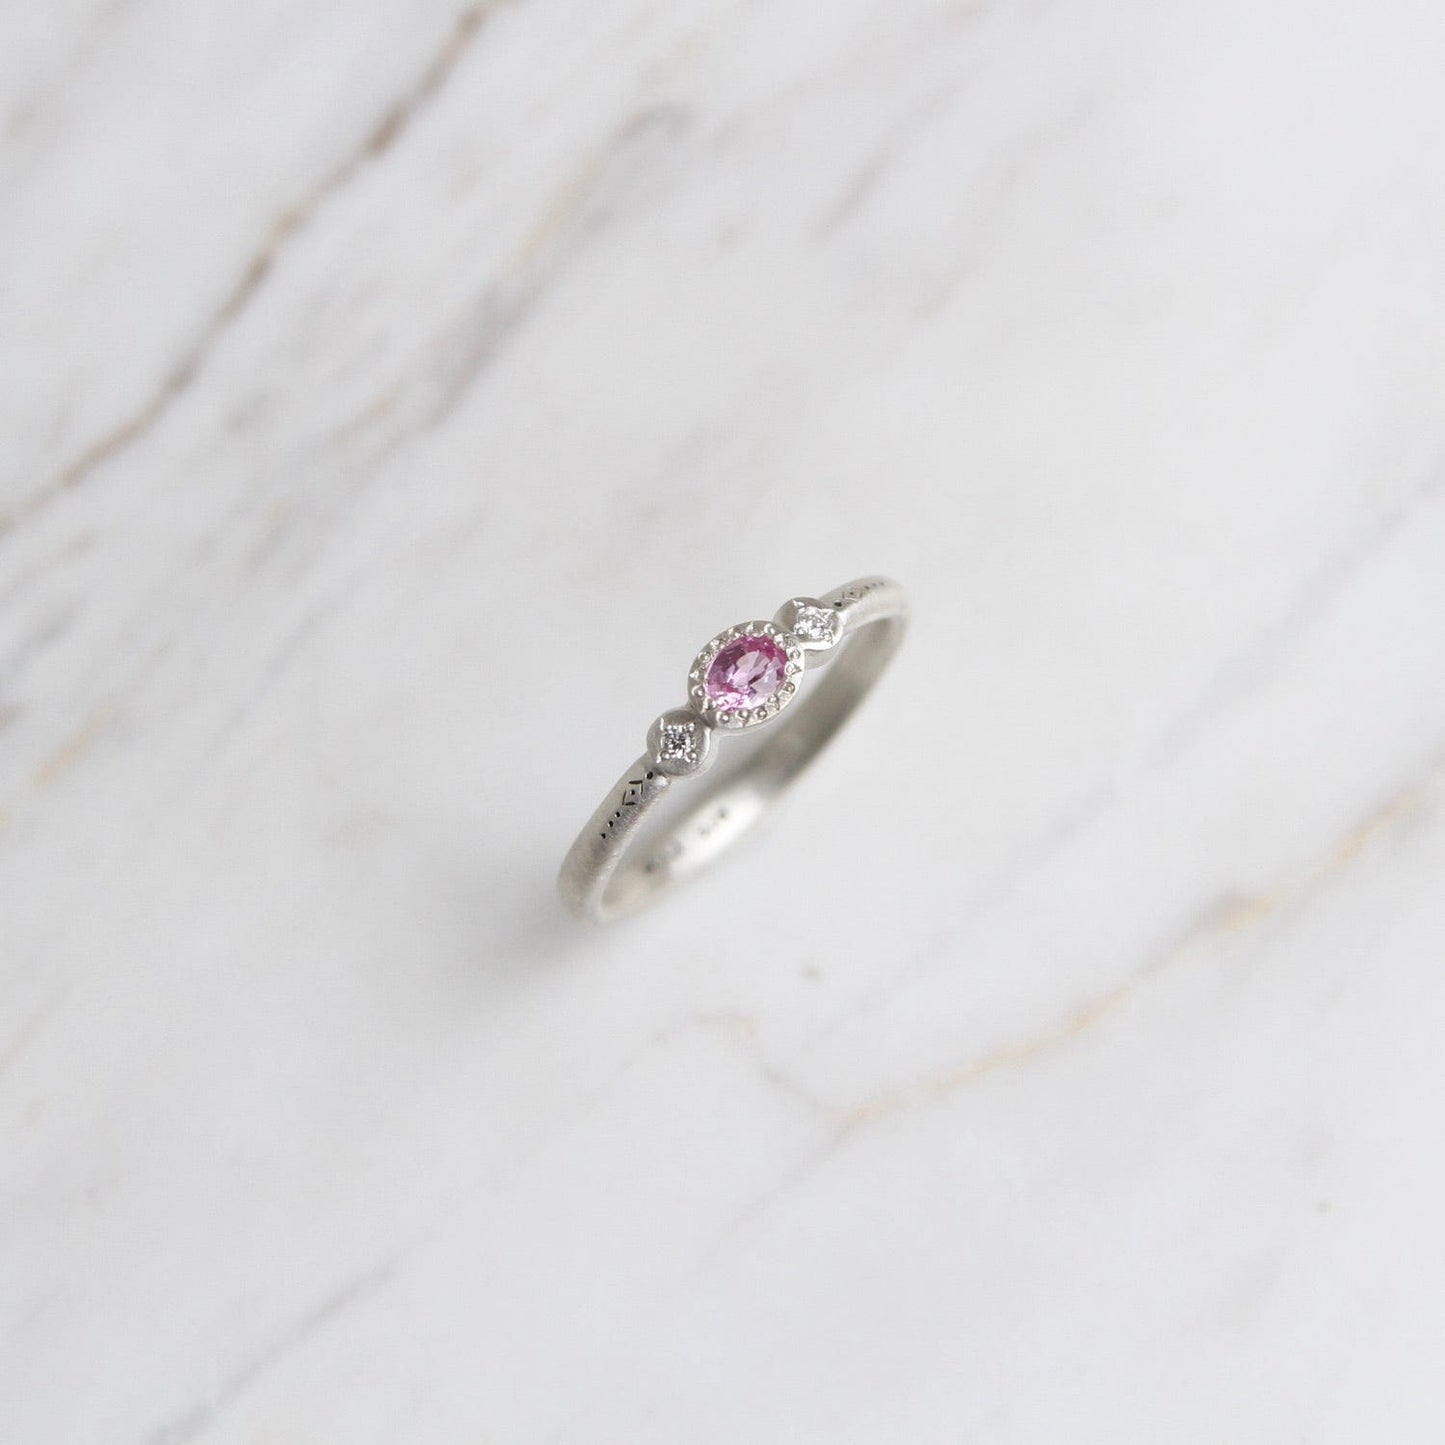 RNG Oval & Round Charm Ring in Pink Sapphire